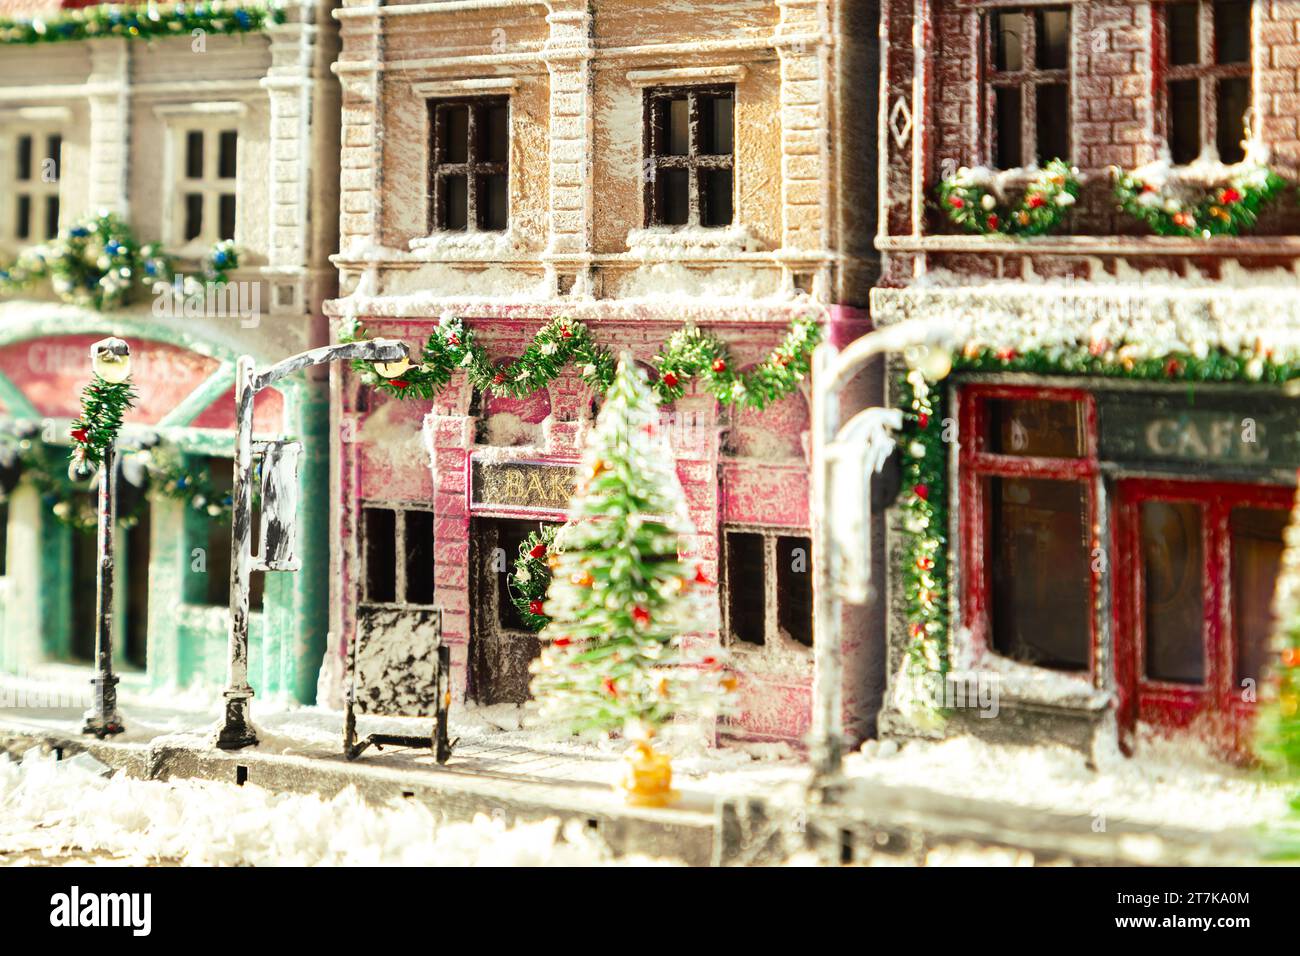 Winter snowy European street decorated for Christmas. Homemade decorated toy houses. All elements of the image are made and drawn by hand. Selective f Stock Photo